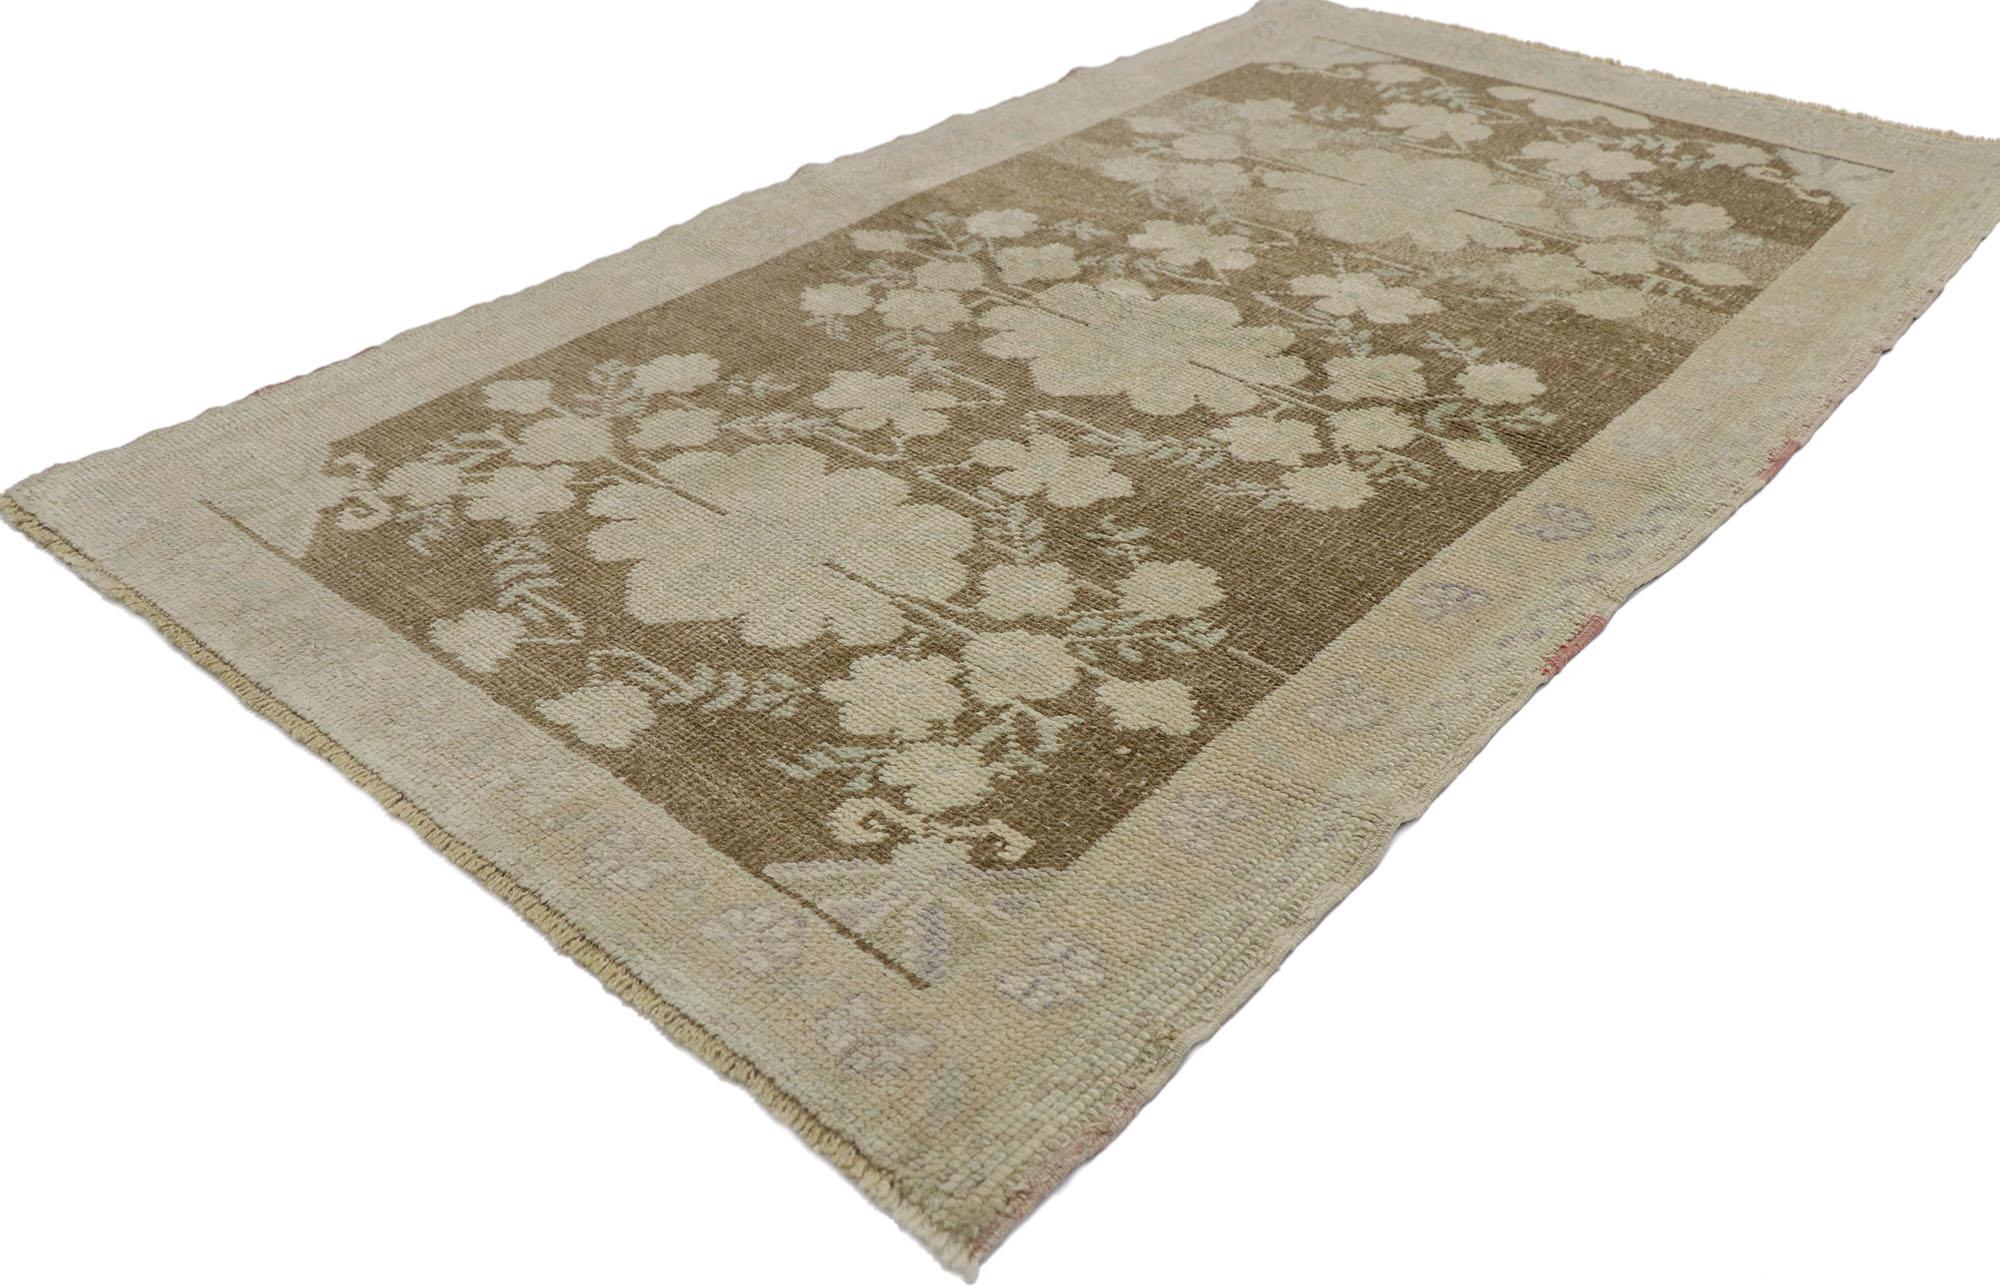 53627 Vintage Turkish Oushak Rug with Modern Farmhouse Style 02'11 x 04'11. Emanating timeless appeal, effortless beauty and neutral hues, this hand knotted wool vintage Turkish Oushak rug is poised to impress. The abrashed brown field features a